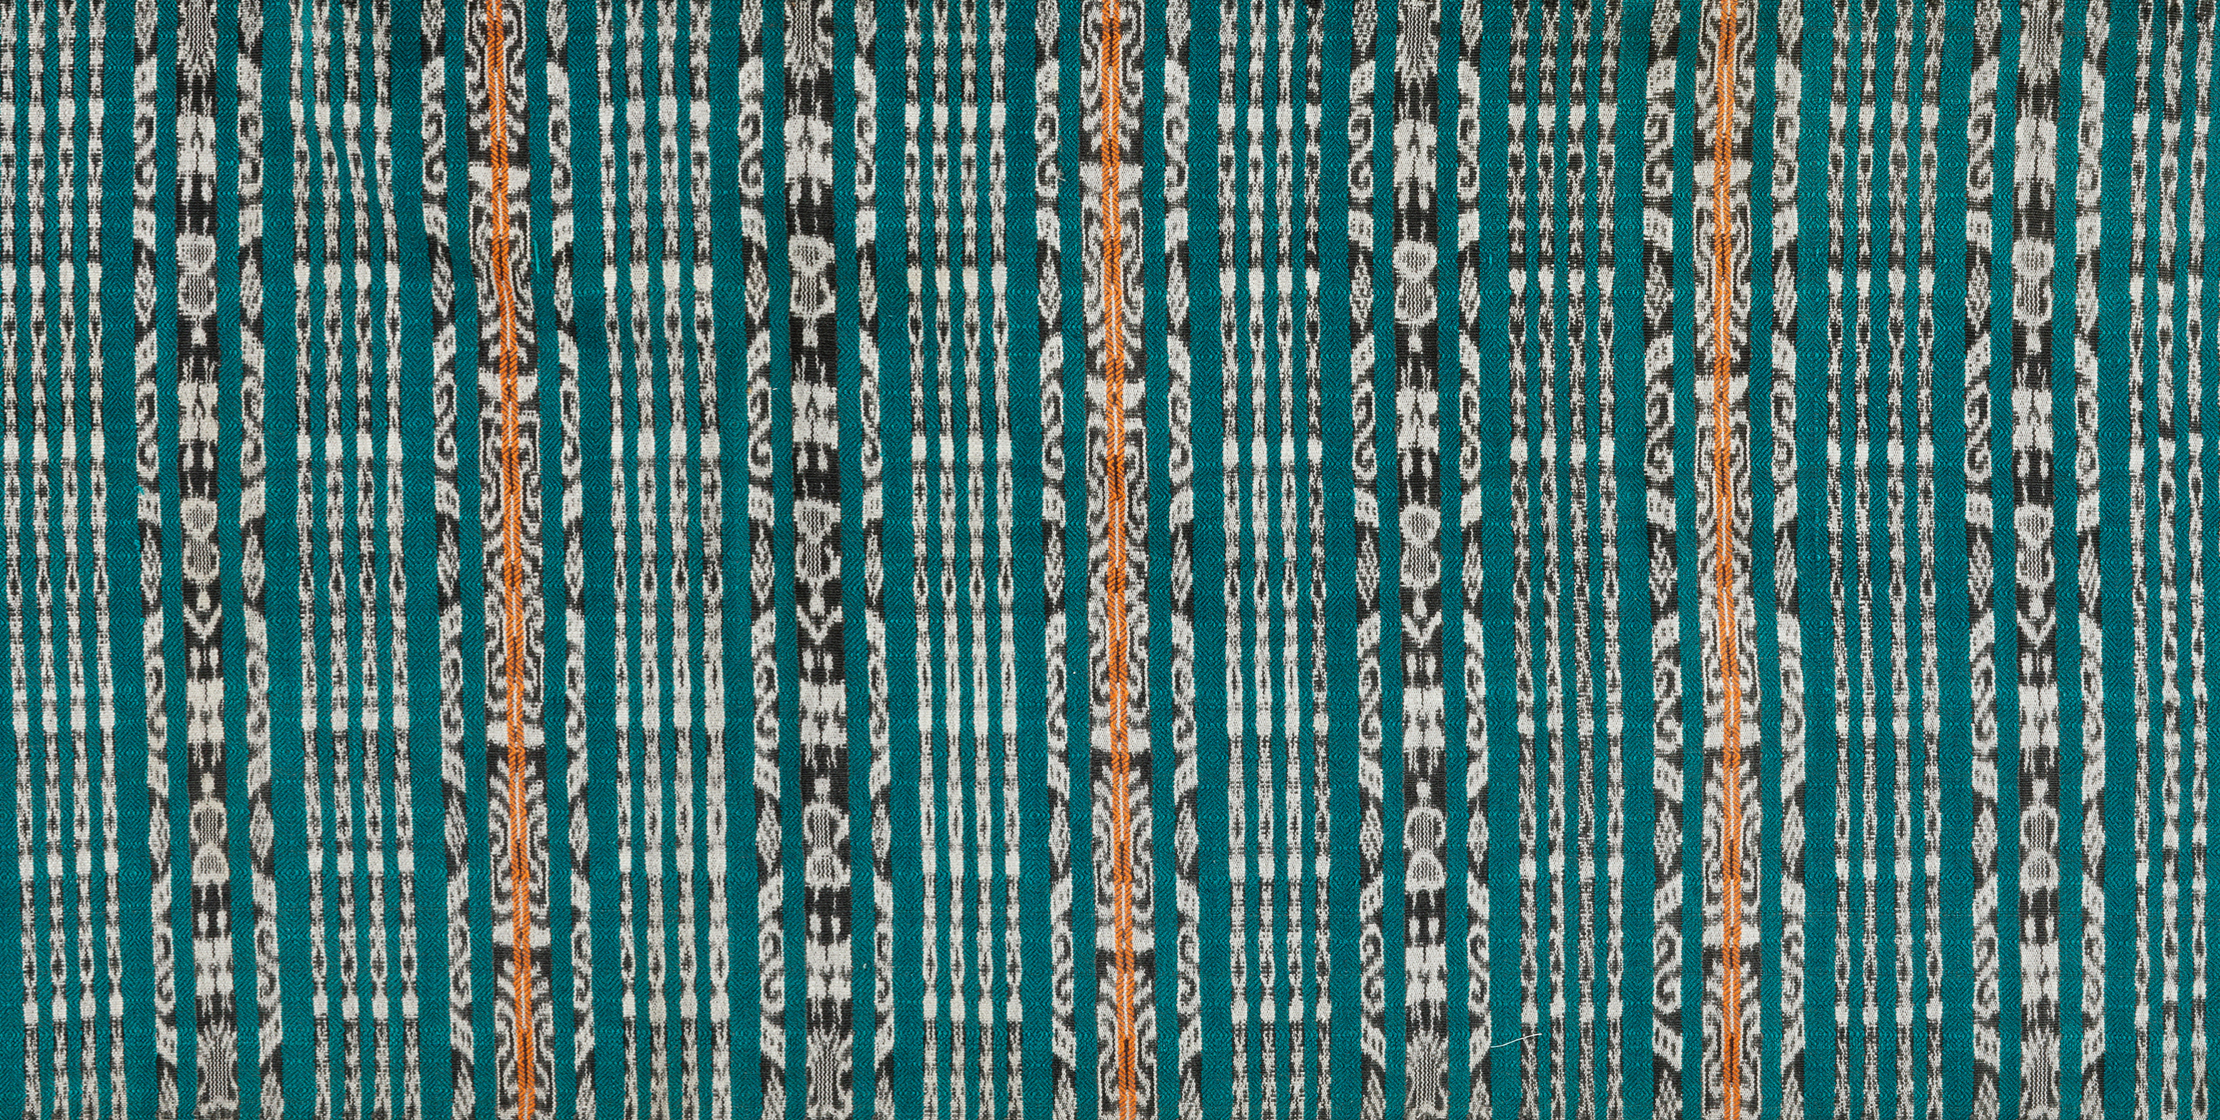 Teal-colored ikat textile with vertical stripes